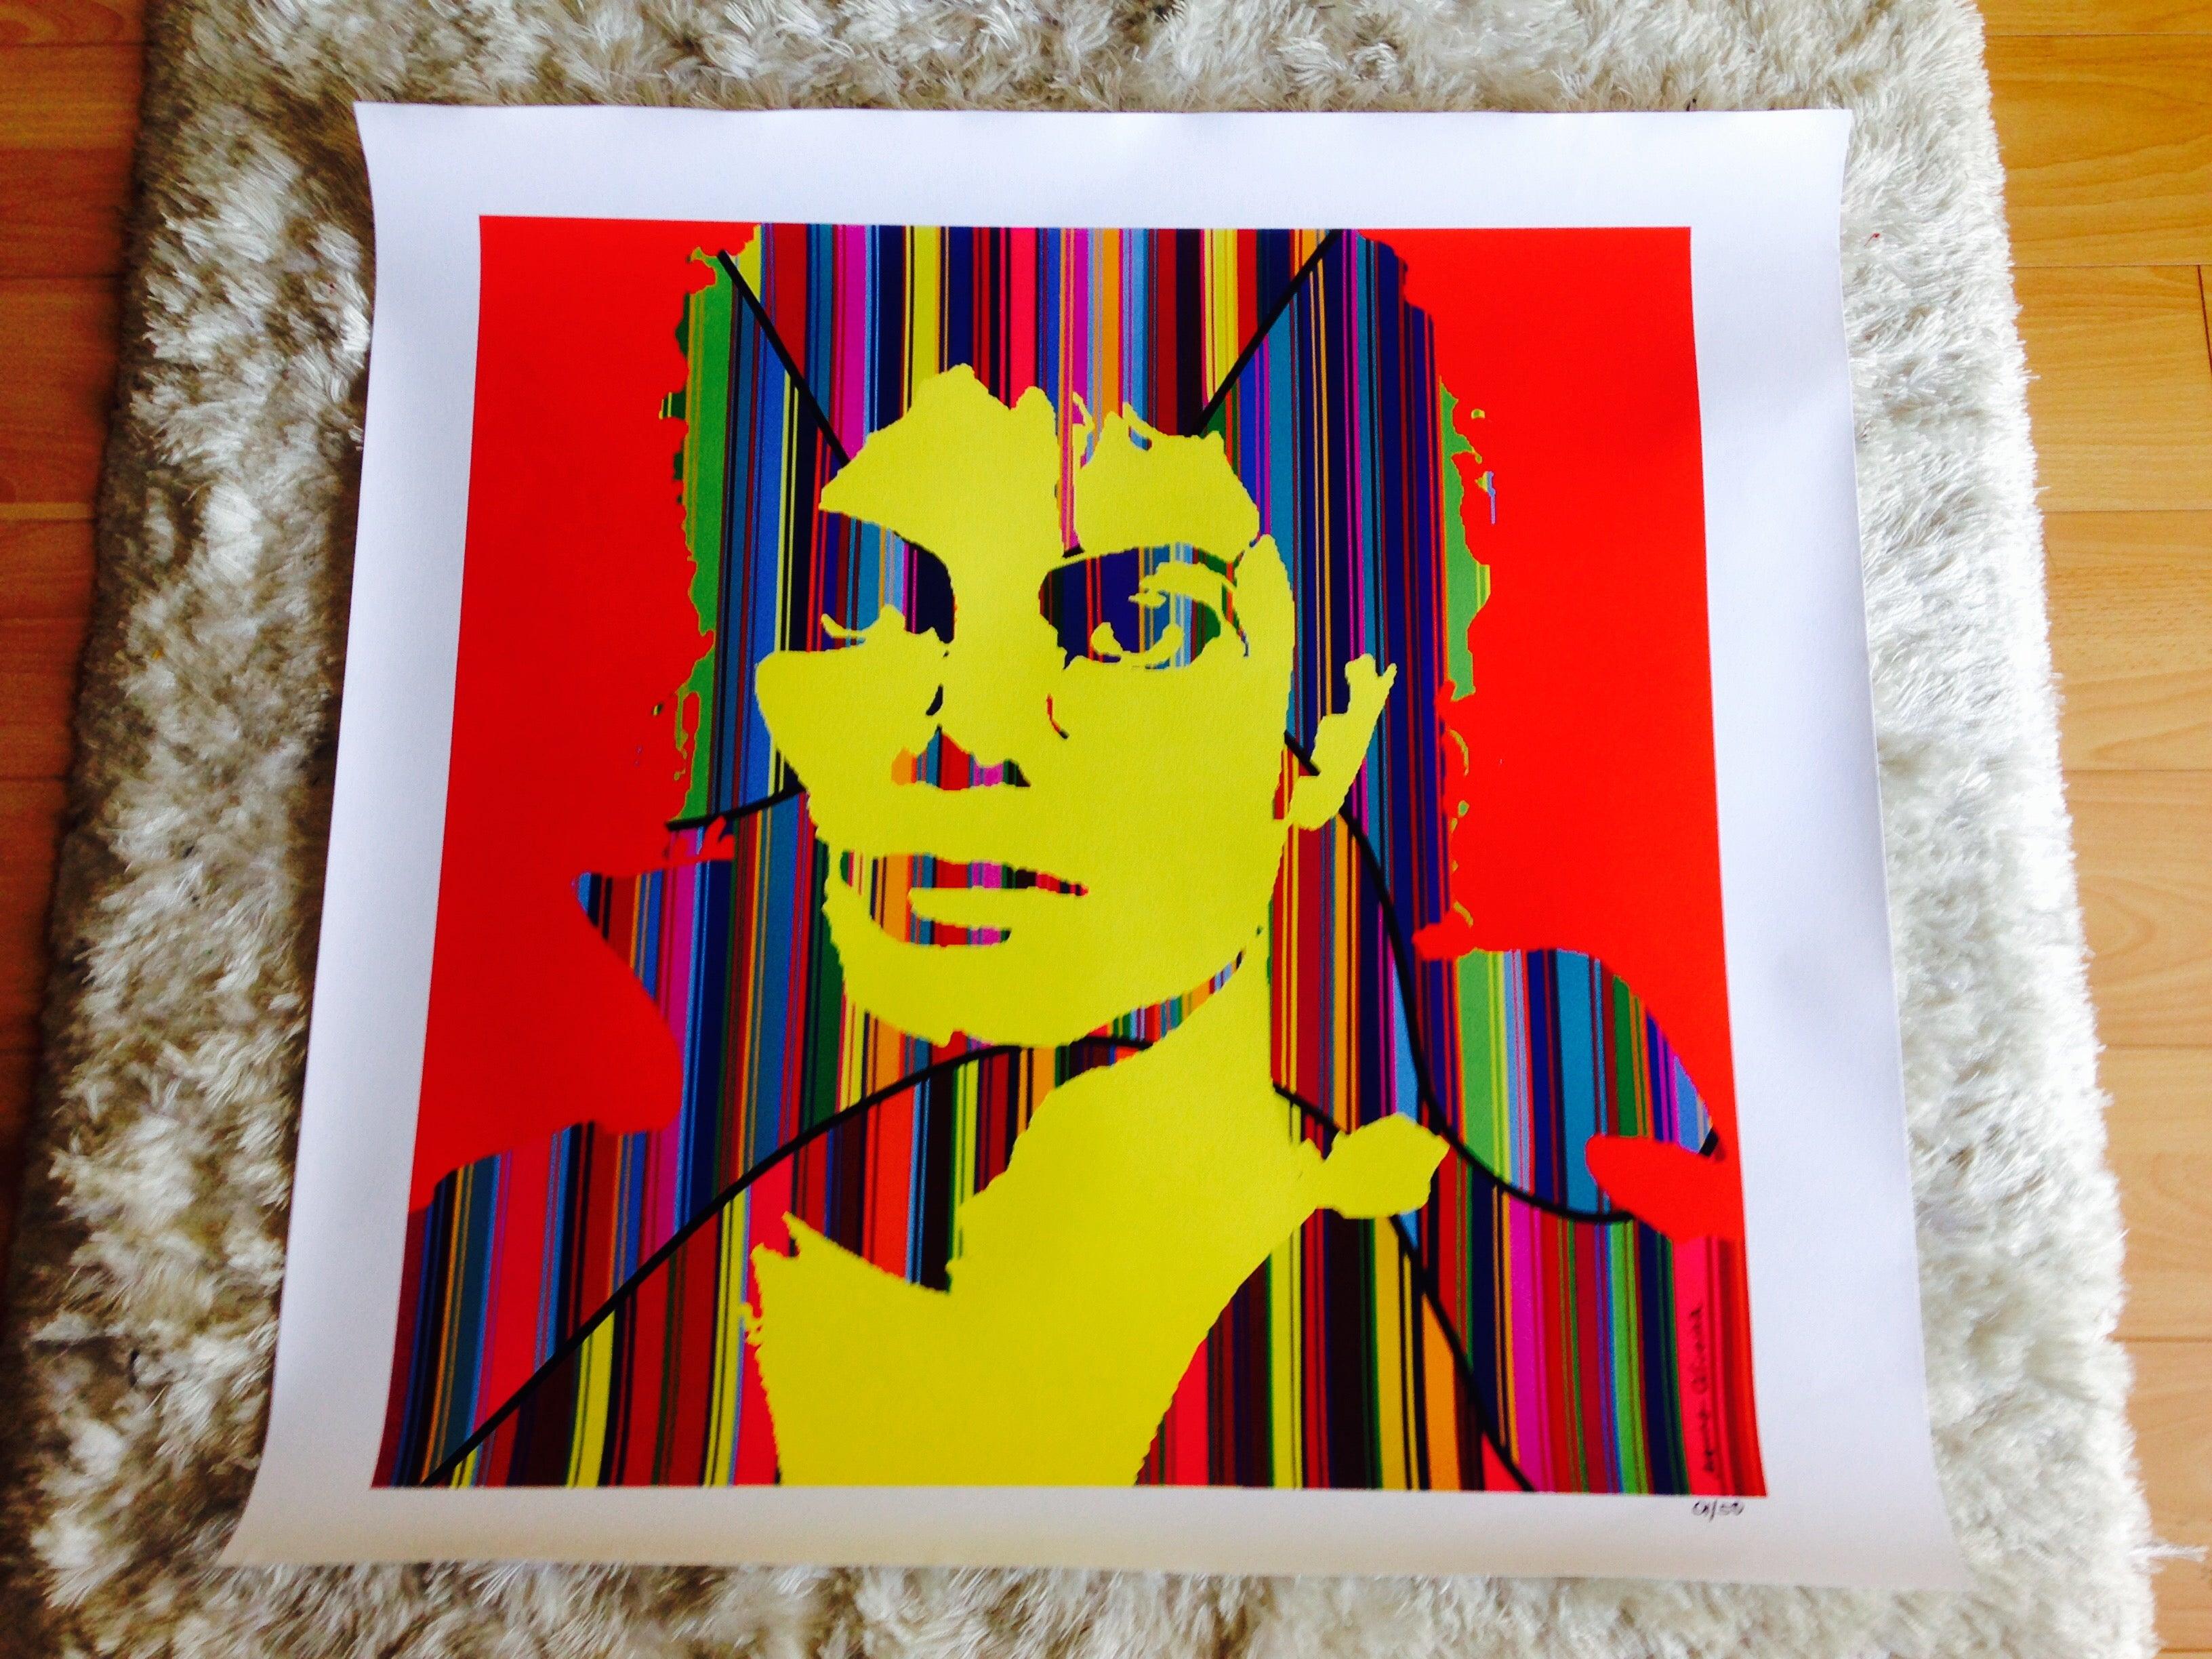 Celebrating the King of Pop Michael Jackson in this unique mixed media Pop artwork by Mauro Oliveira. The colorful stripes represents the music and happiness the king of pop left to the world.

Limited edition of 30 museum quality Giclee prints on